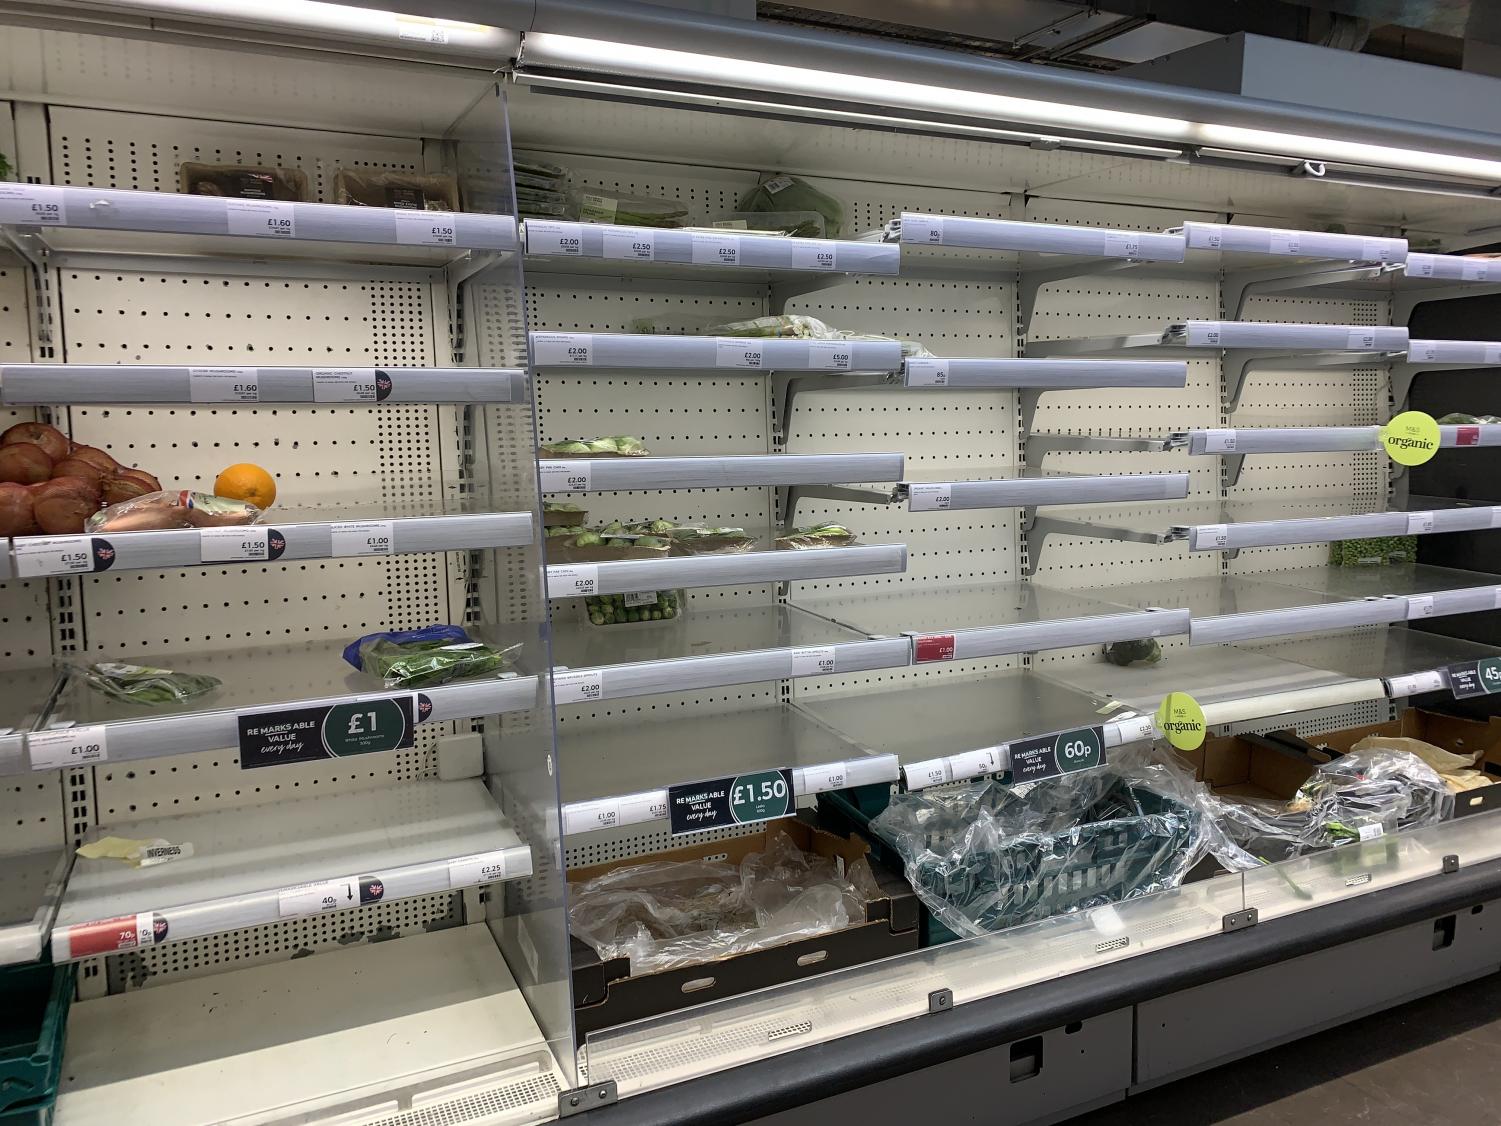 The aisles at the M&S in Earls Court are barren because of panic-buying . Some stores are adding item limits to combat the issue.